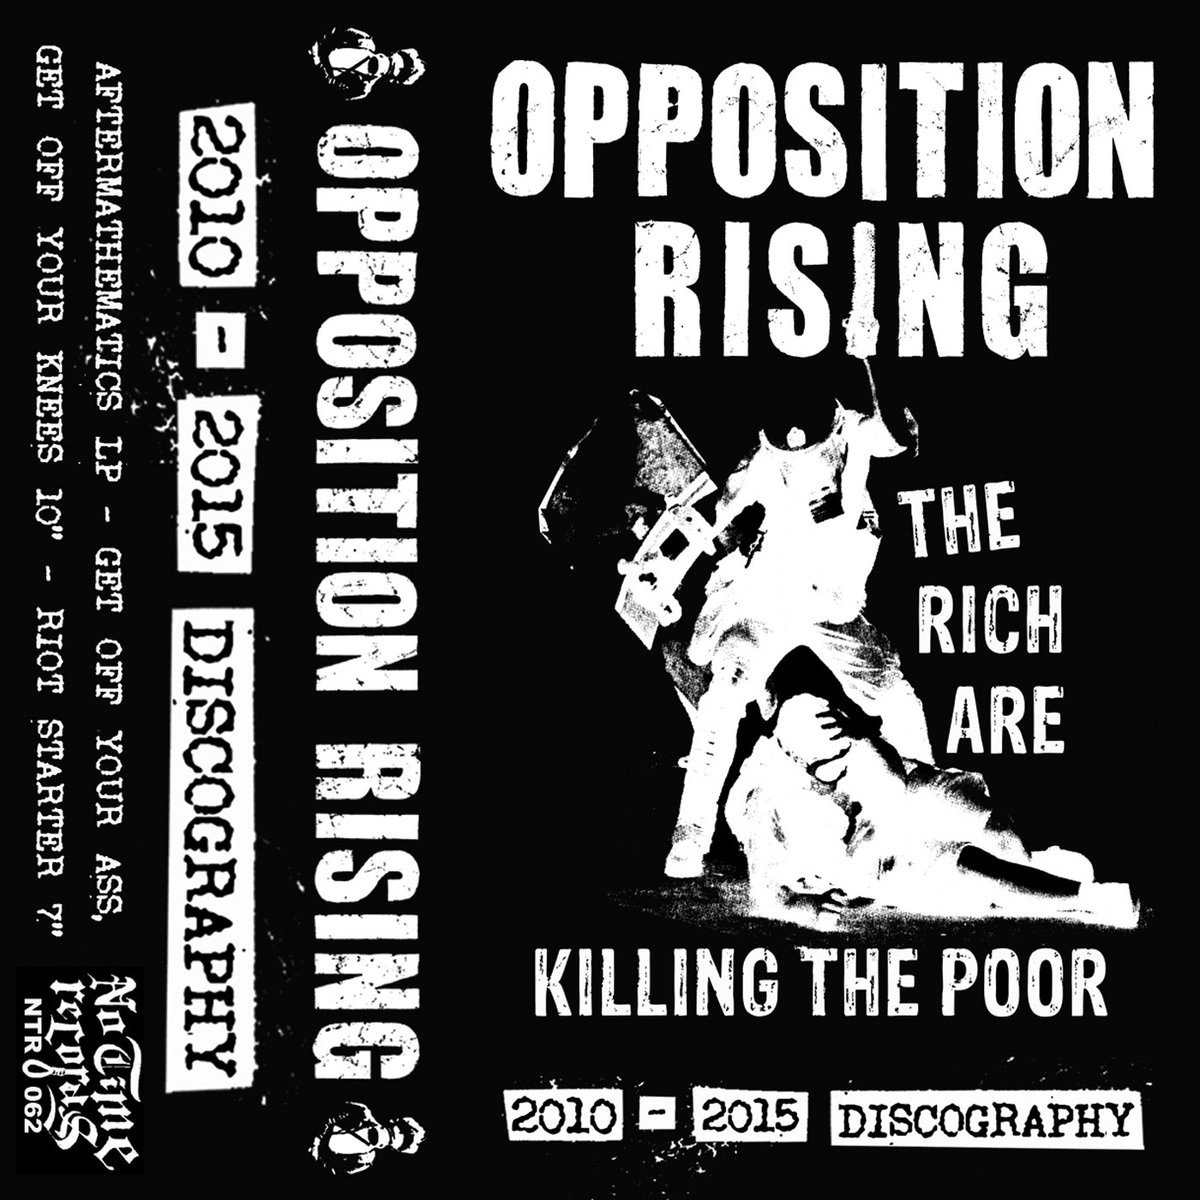 Opposition Rising - 2010-2015 Discography Cass